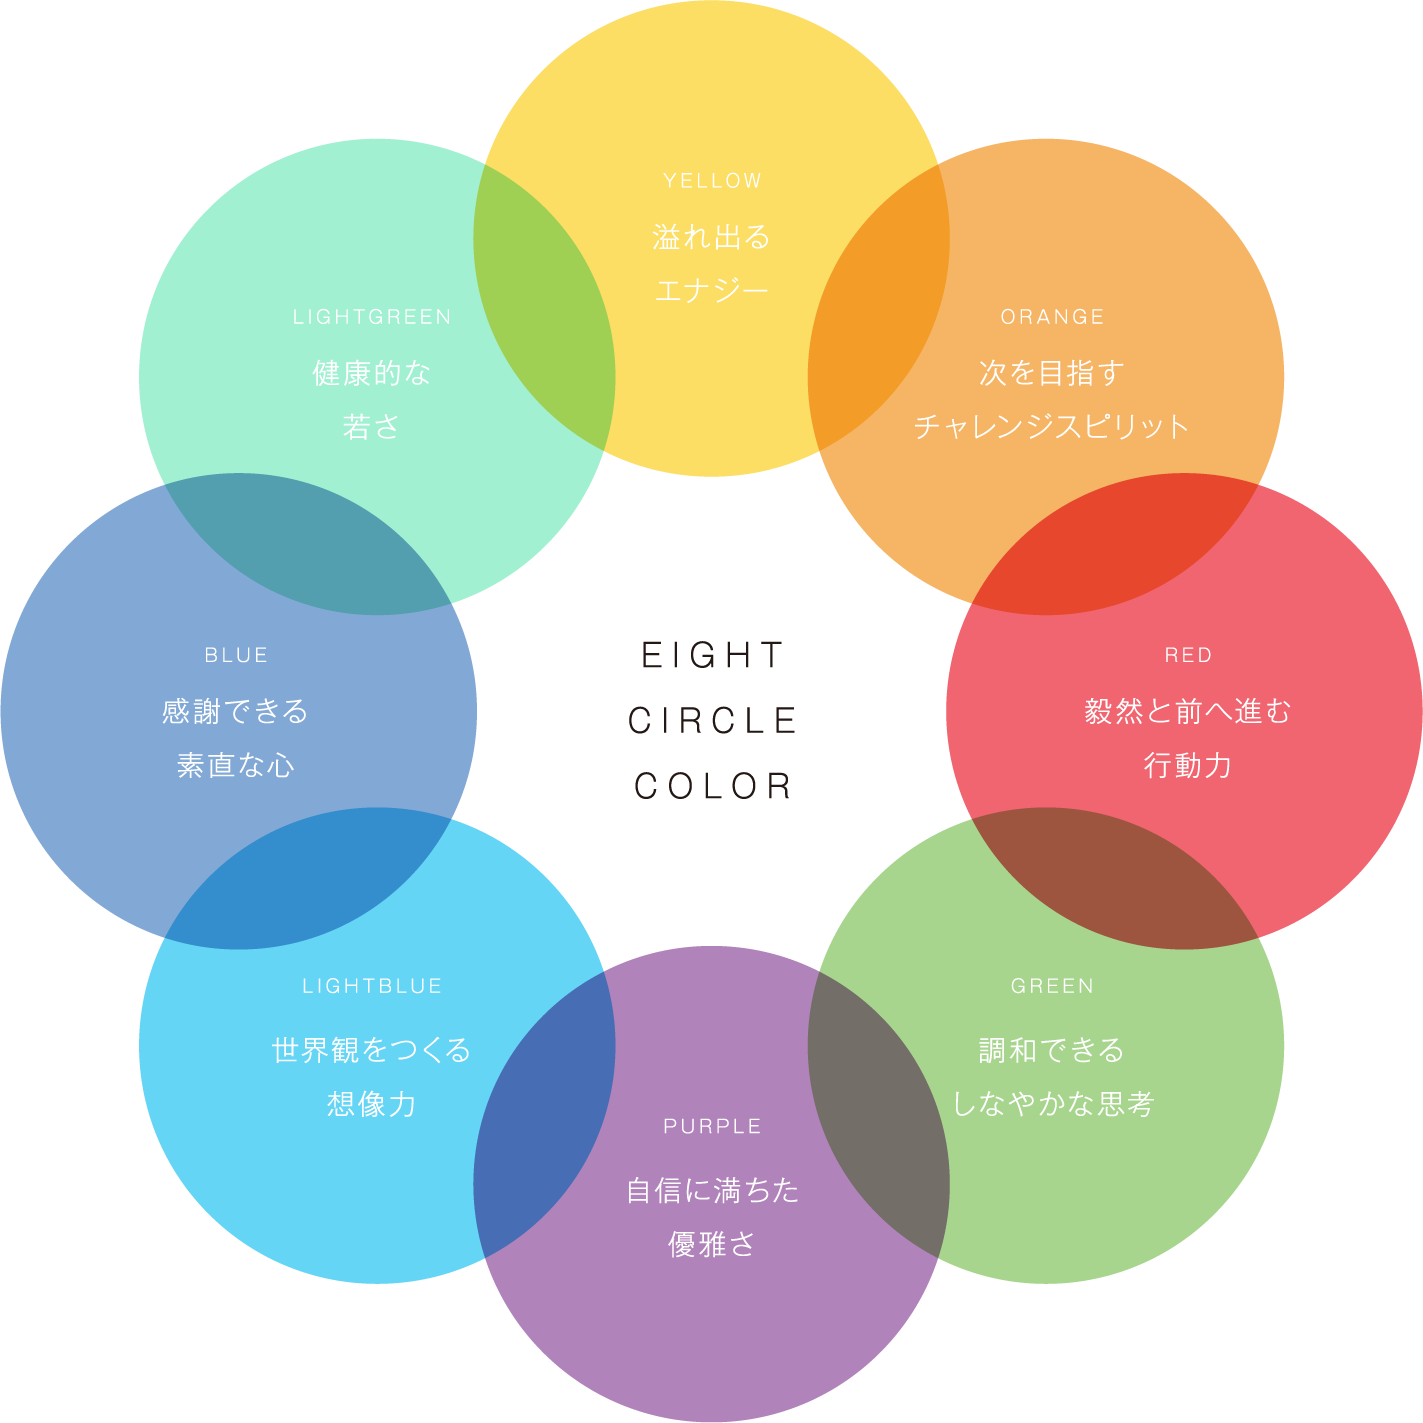 EIGHT CIRCLE COLOR